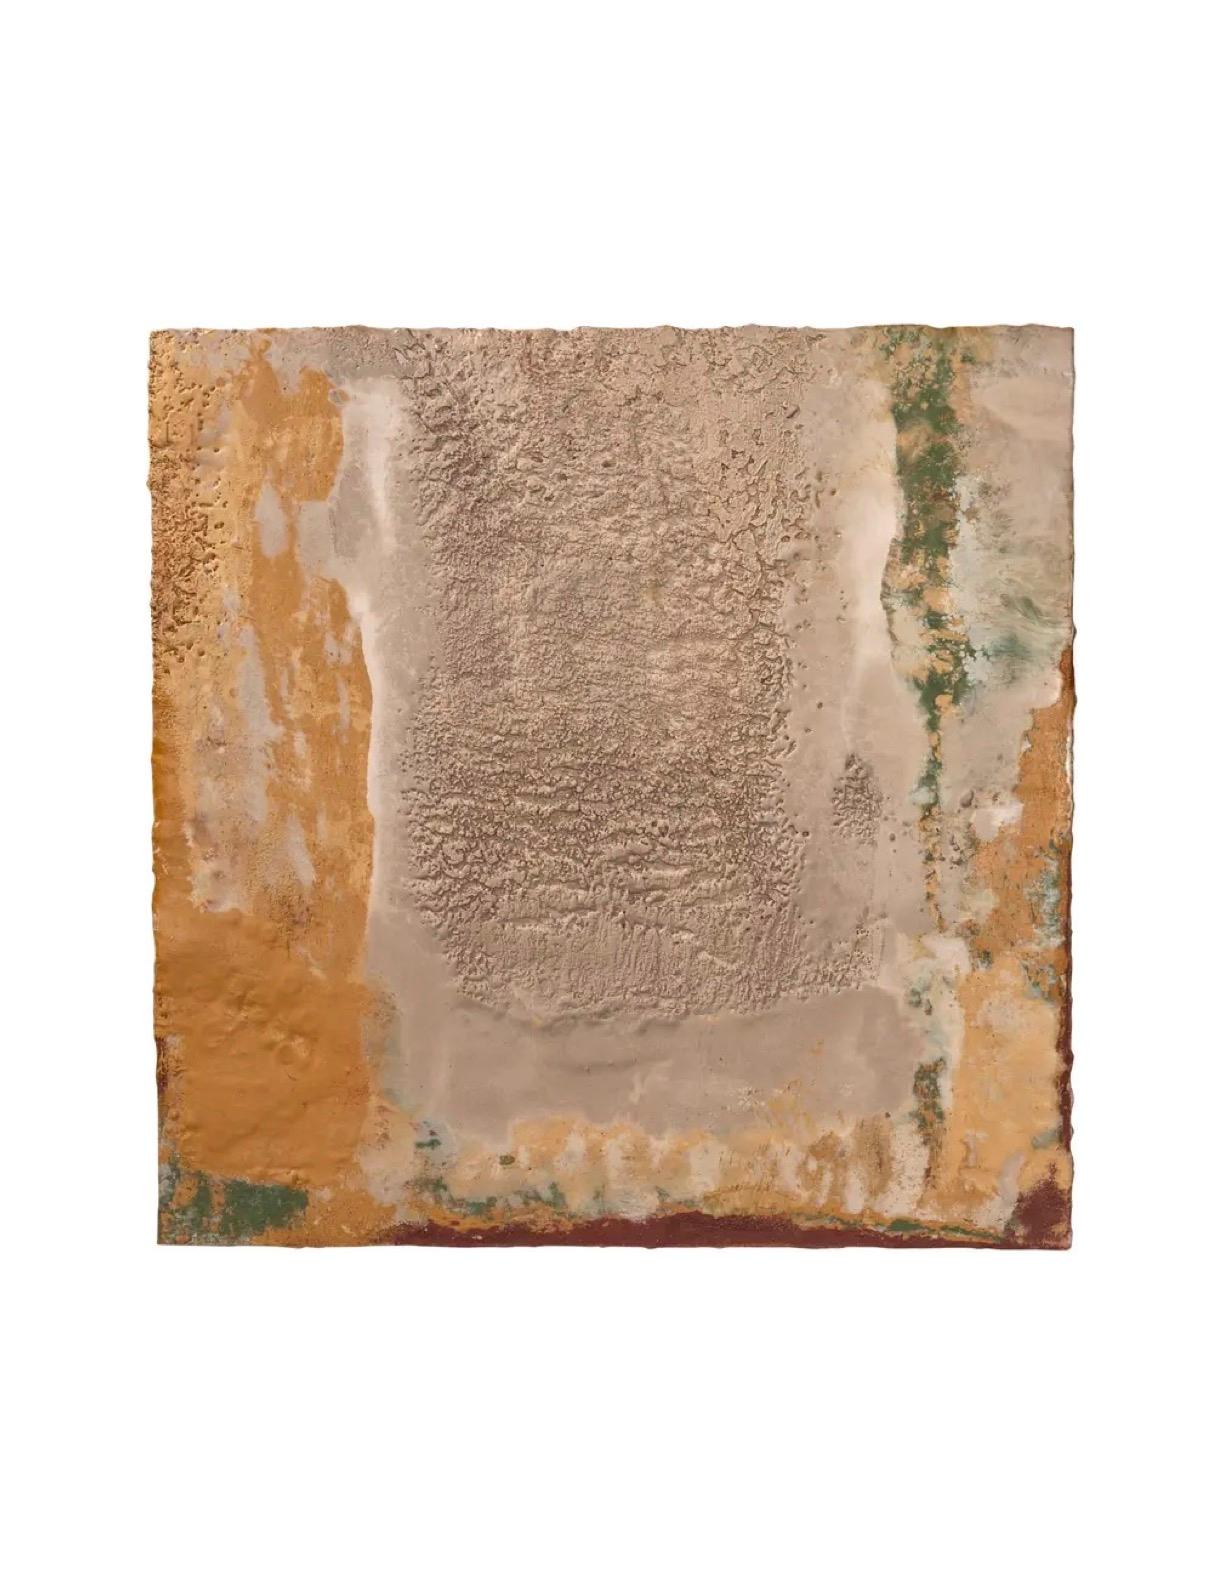 Modern Richard Hirsch Encaustic Painting of Nothing #25, 2011 For Sale